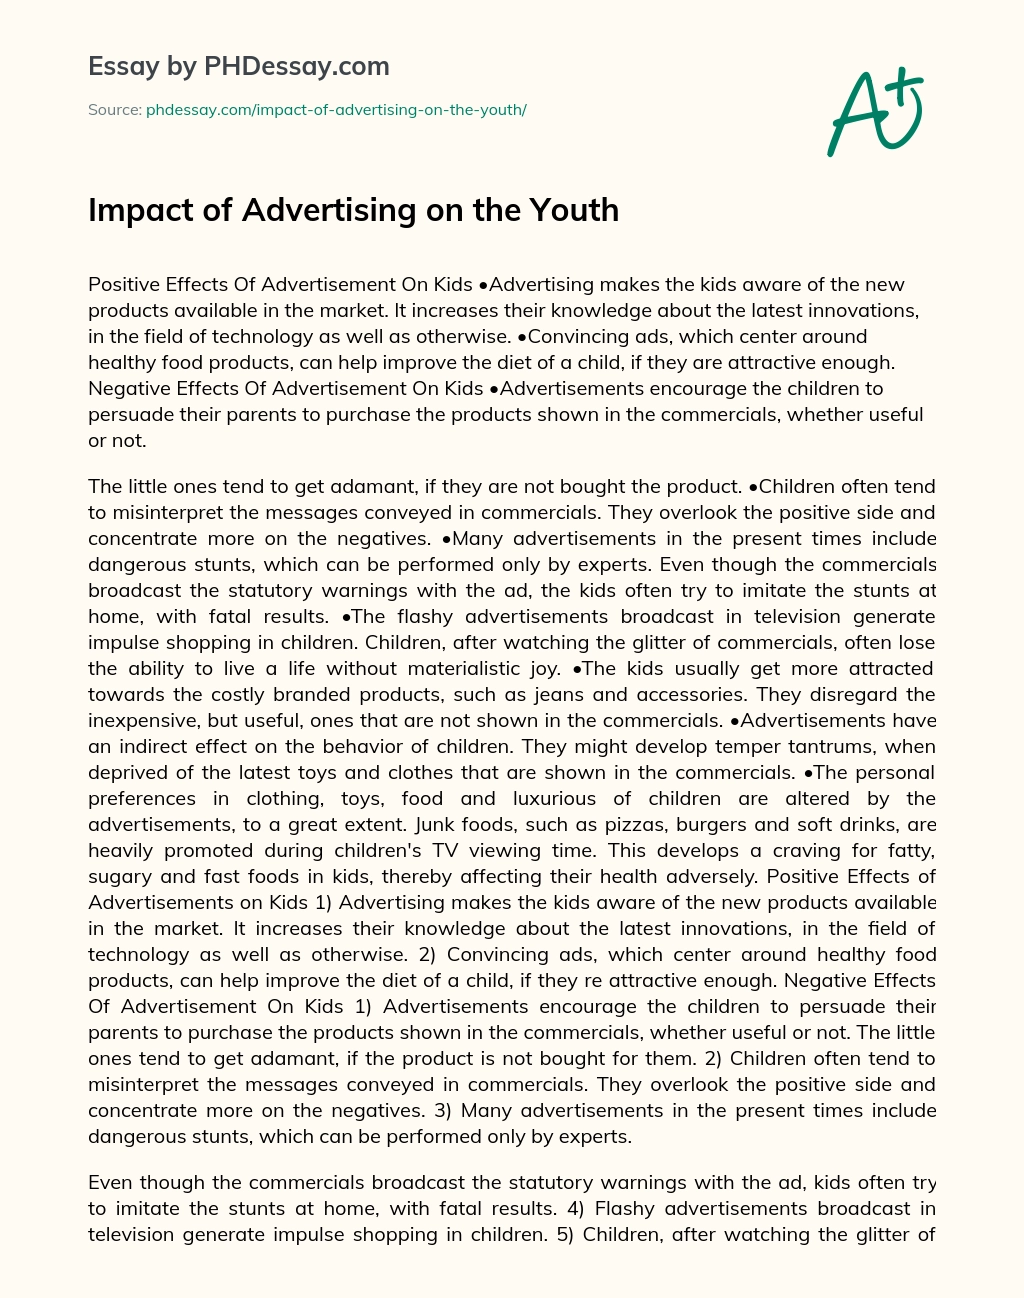 harmful effects of advertising on youth